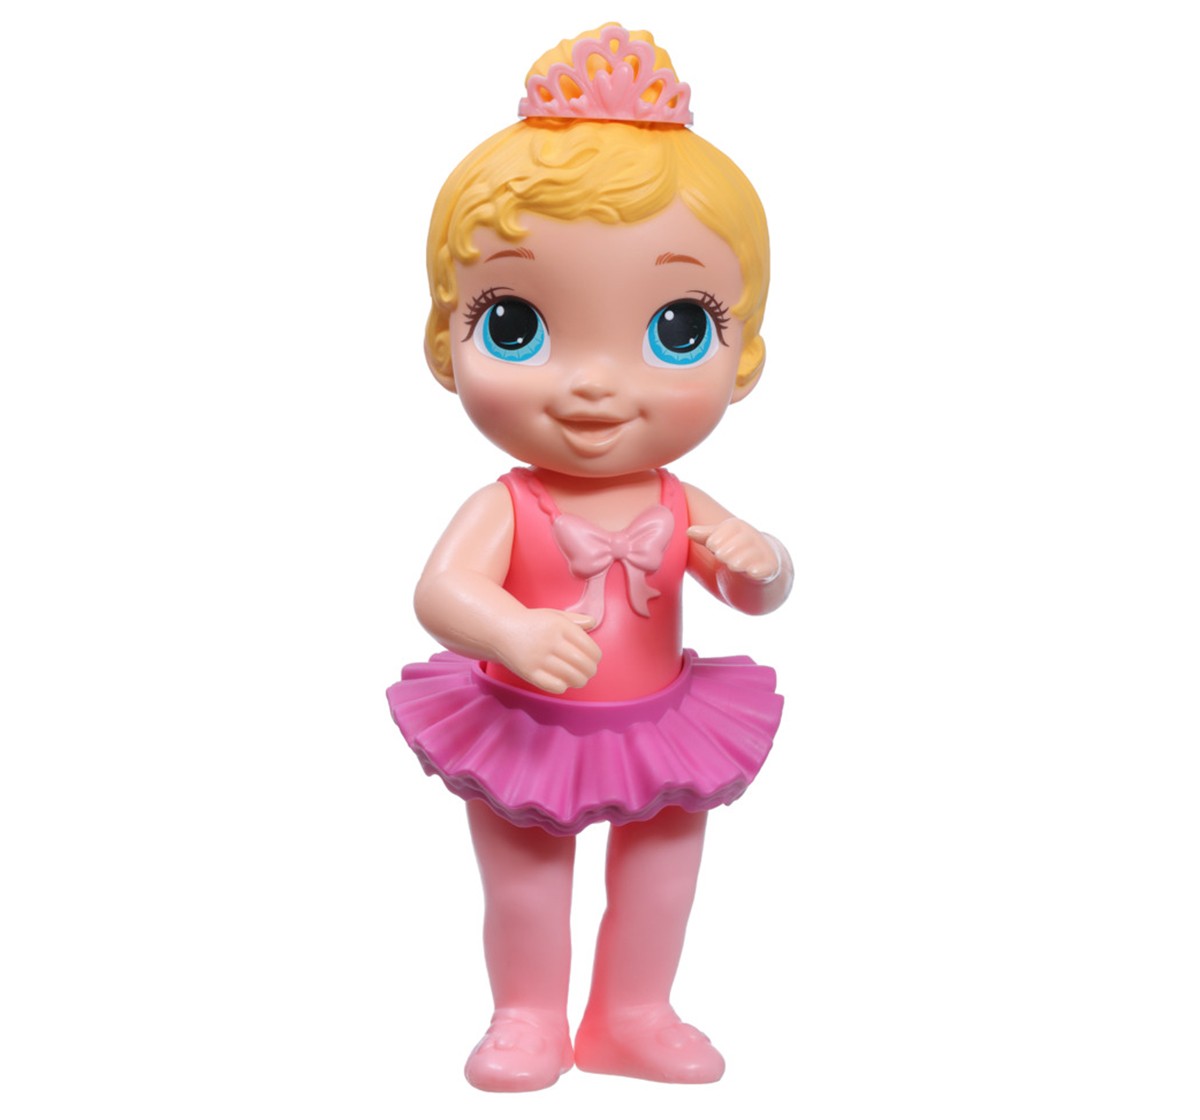 Baby Alive Sweet Ballerina Baby Doll, Pink, 10.5 Inch Ballet Doll with Tutu Skirt and Tiara, Blonde Hair Toy for Kids, Multicolor, 3Y+